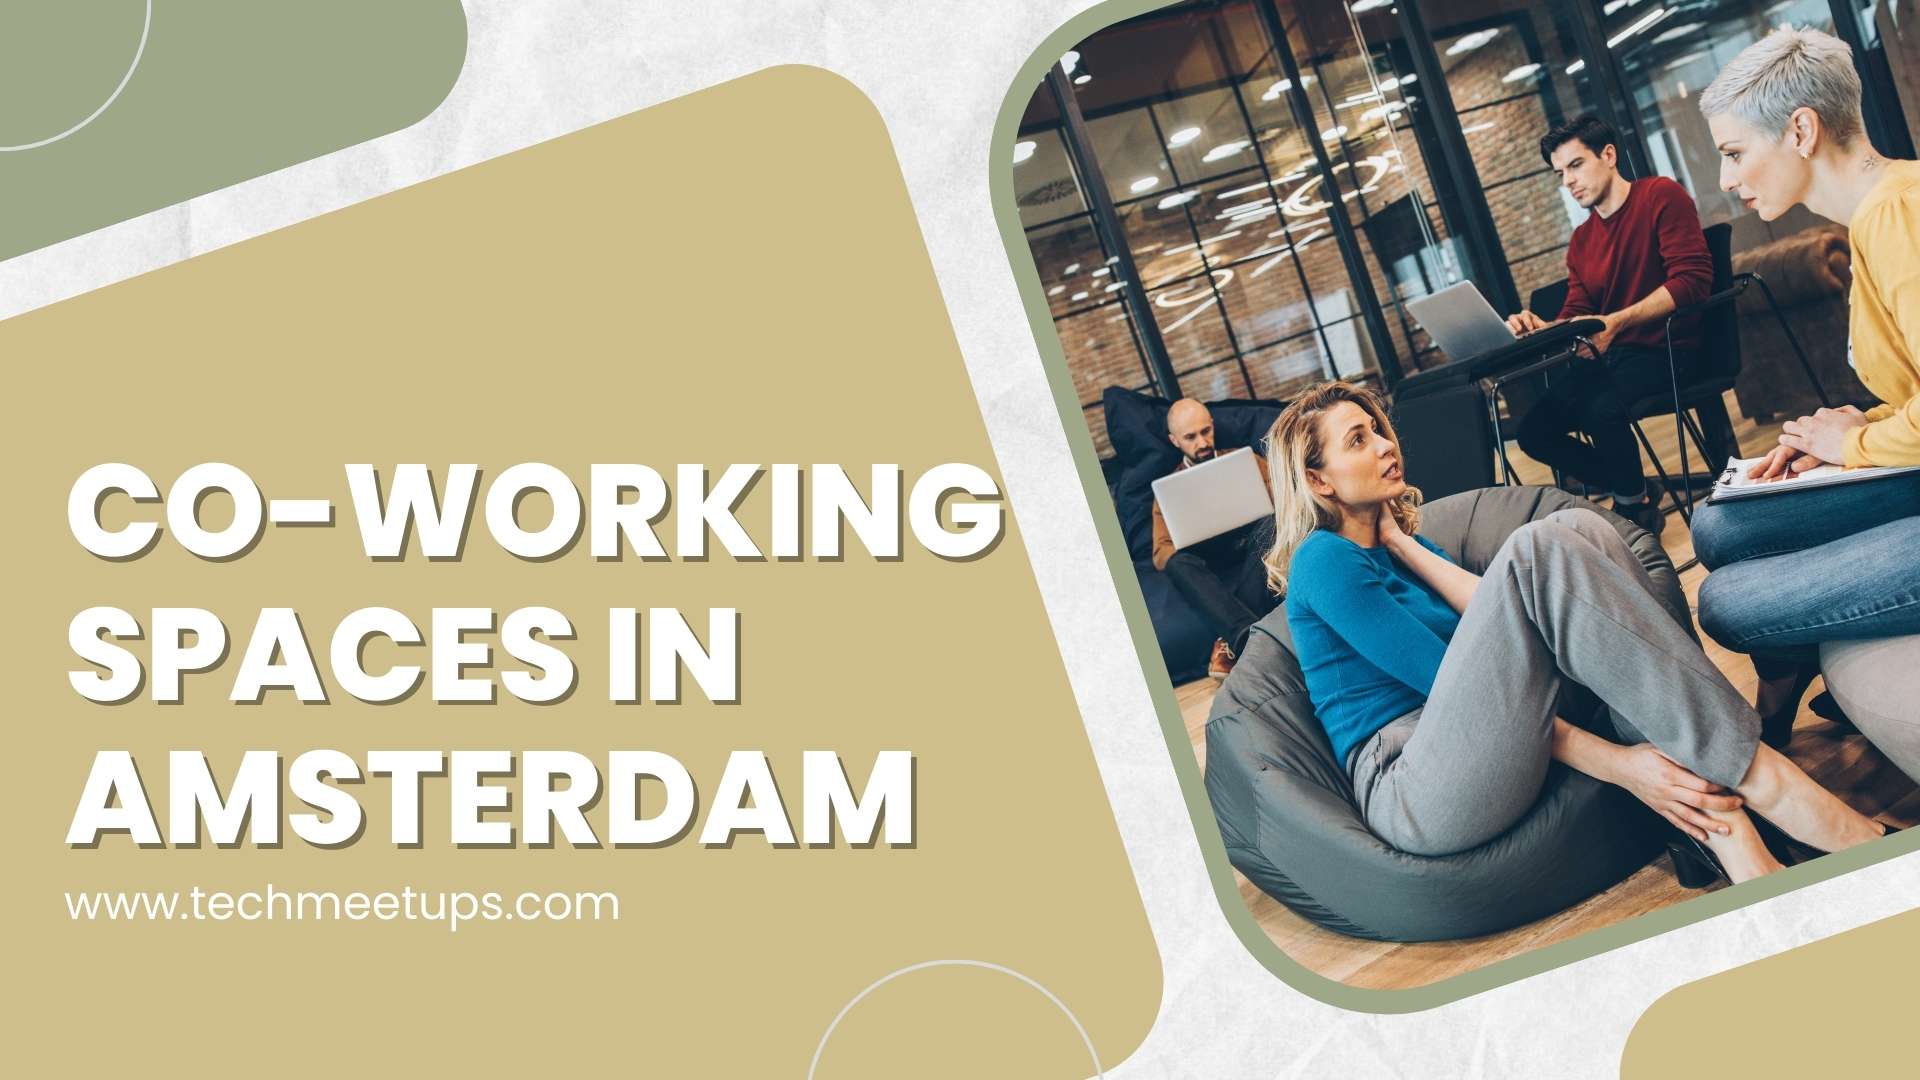 Co-working Spaces in Amsterdam